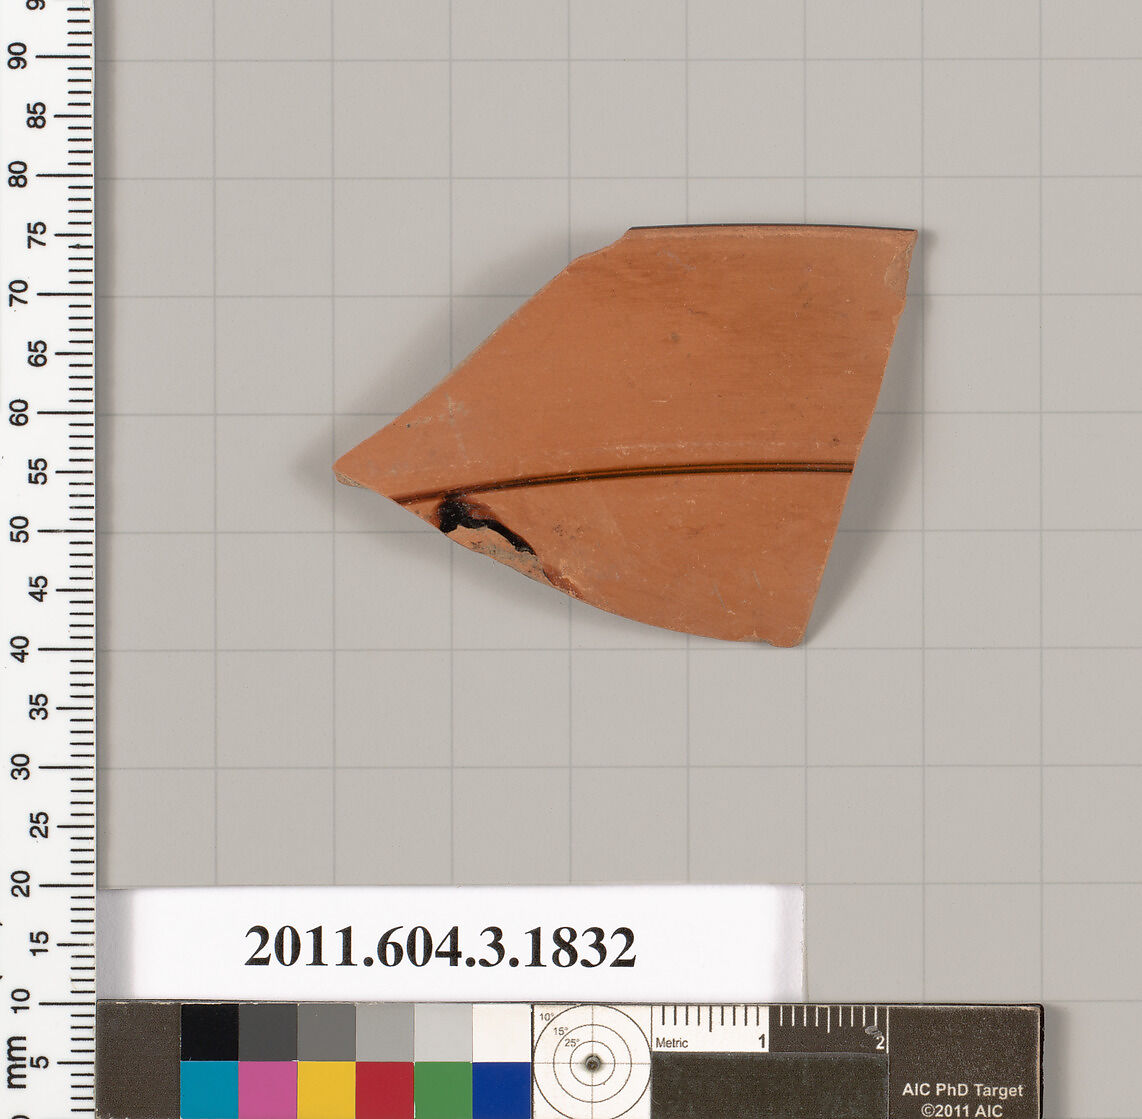 Terracotta fragment of a kylix: Lip cup (drinking cup), Terracotta, Greek, Attic 